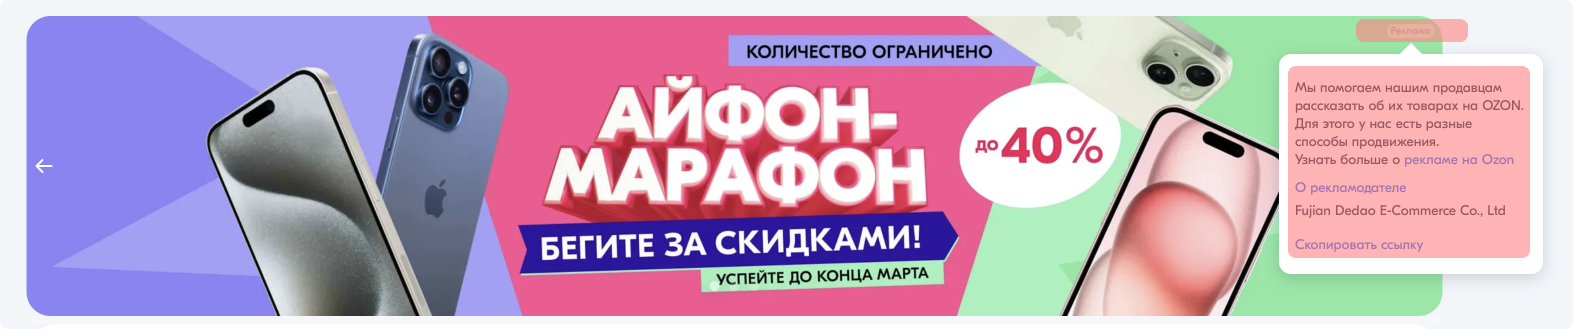 Ad Labeling in Russia